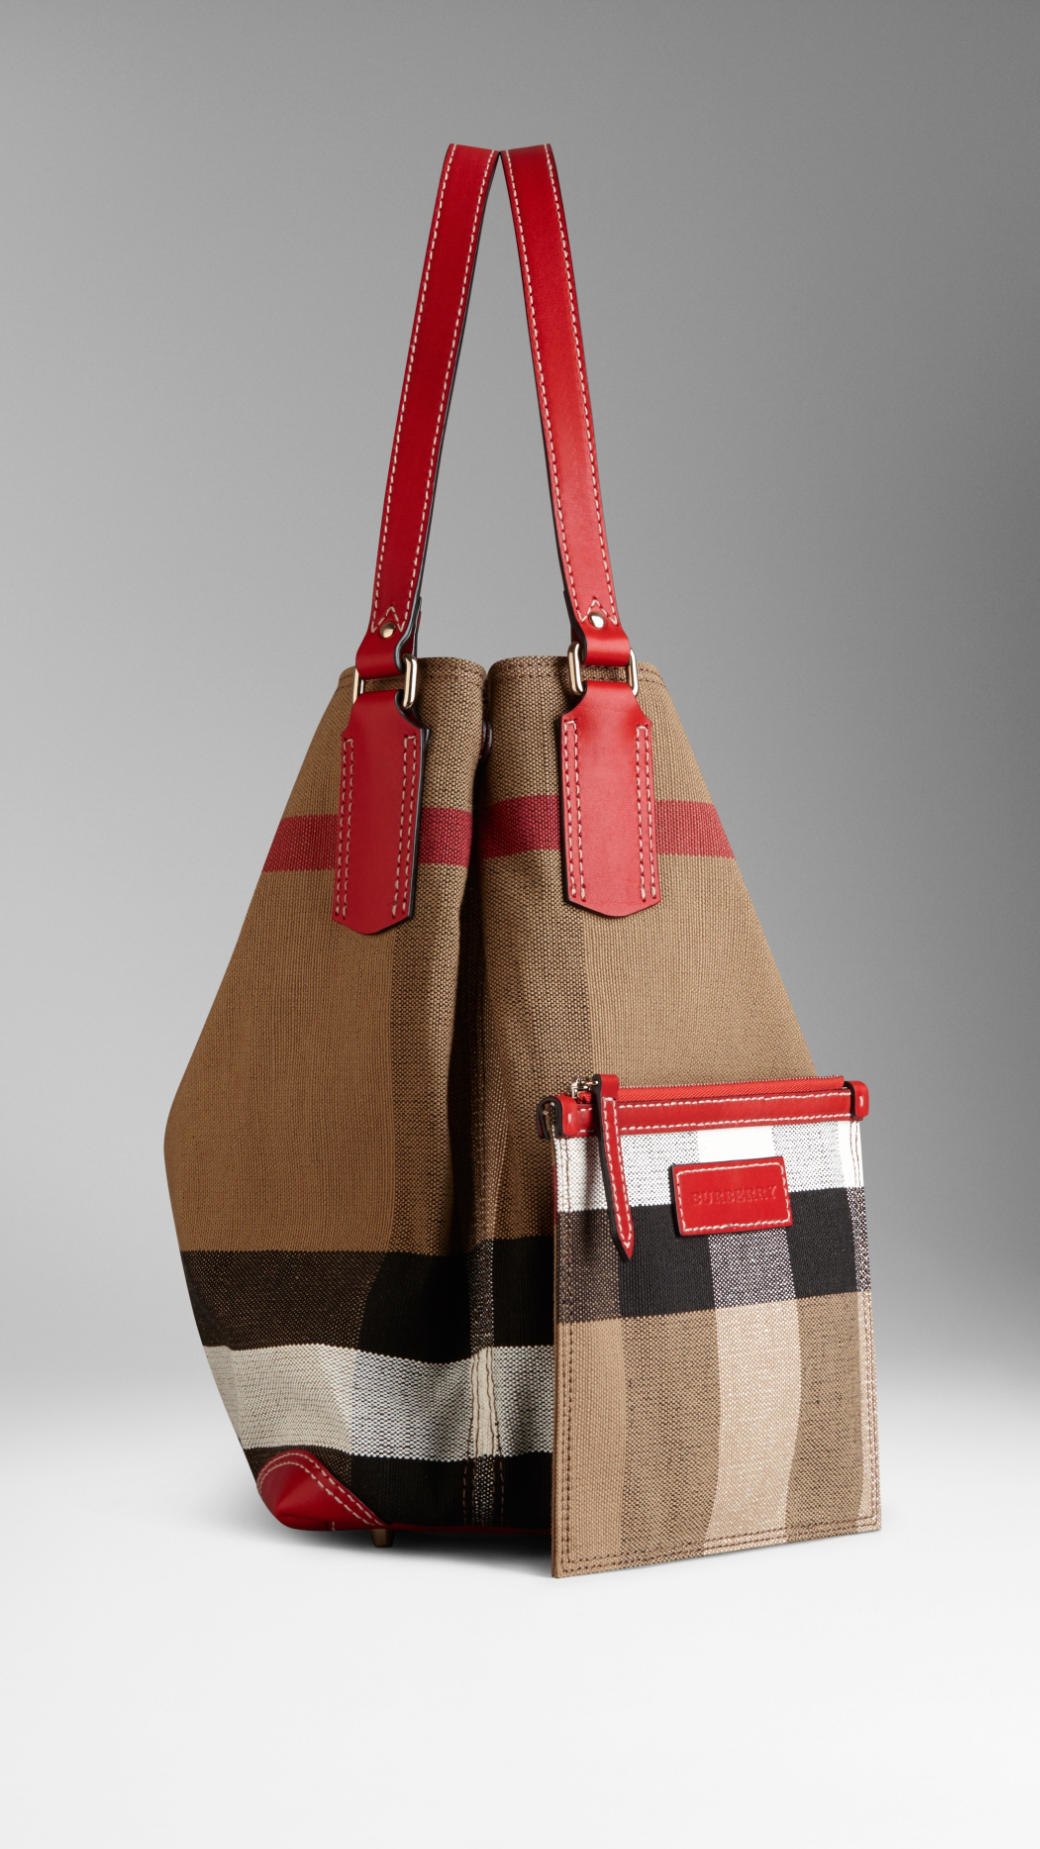 Burberry Medium Canvas Check Tote Bag in Red - Lyst